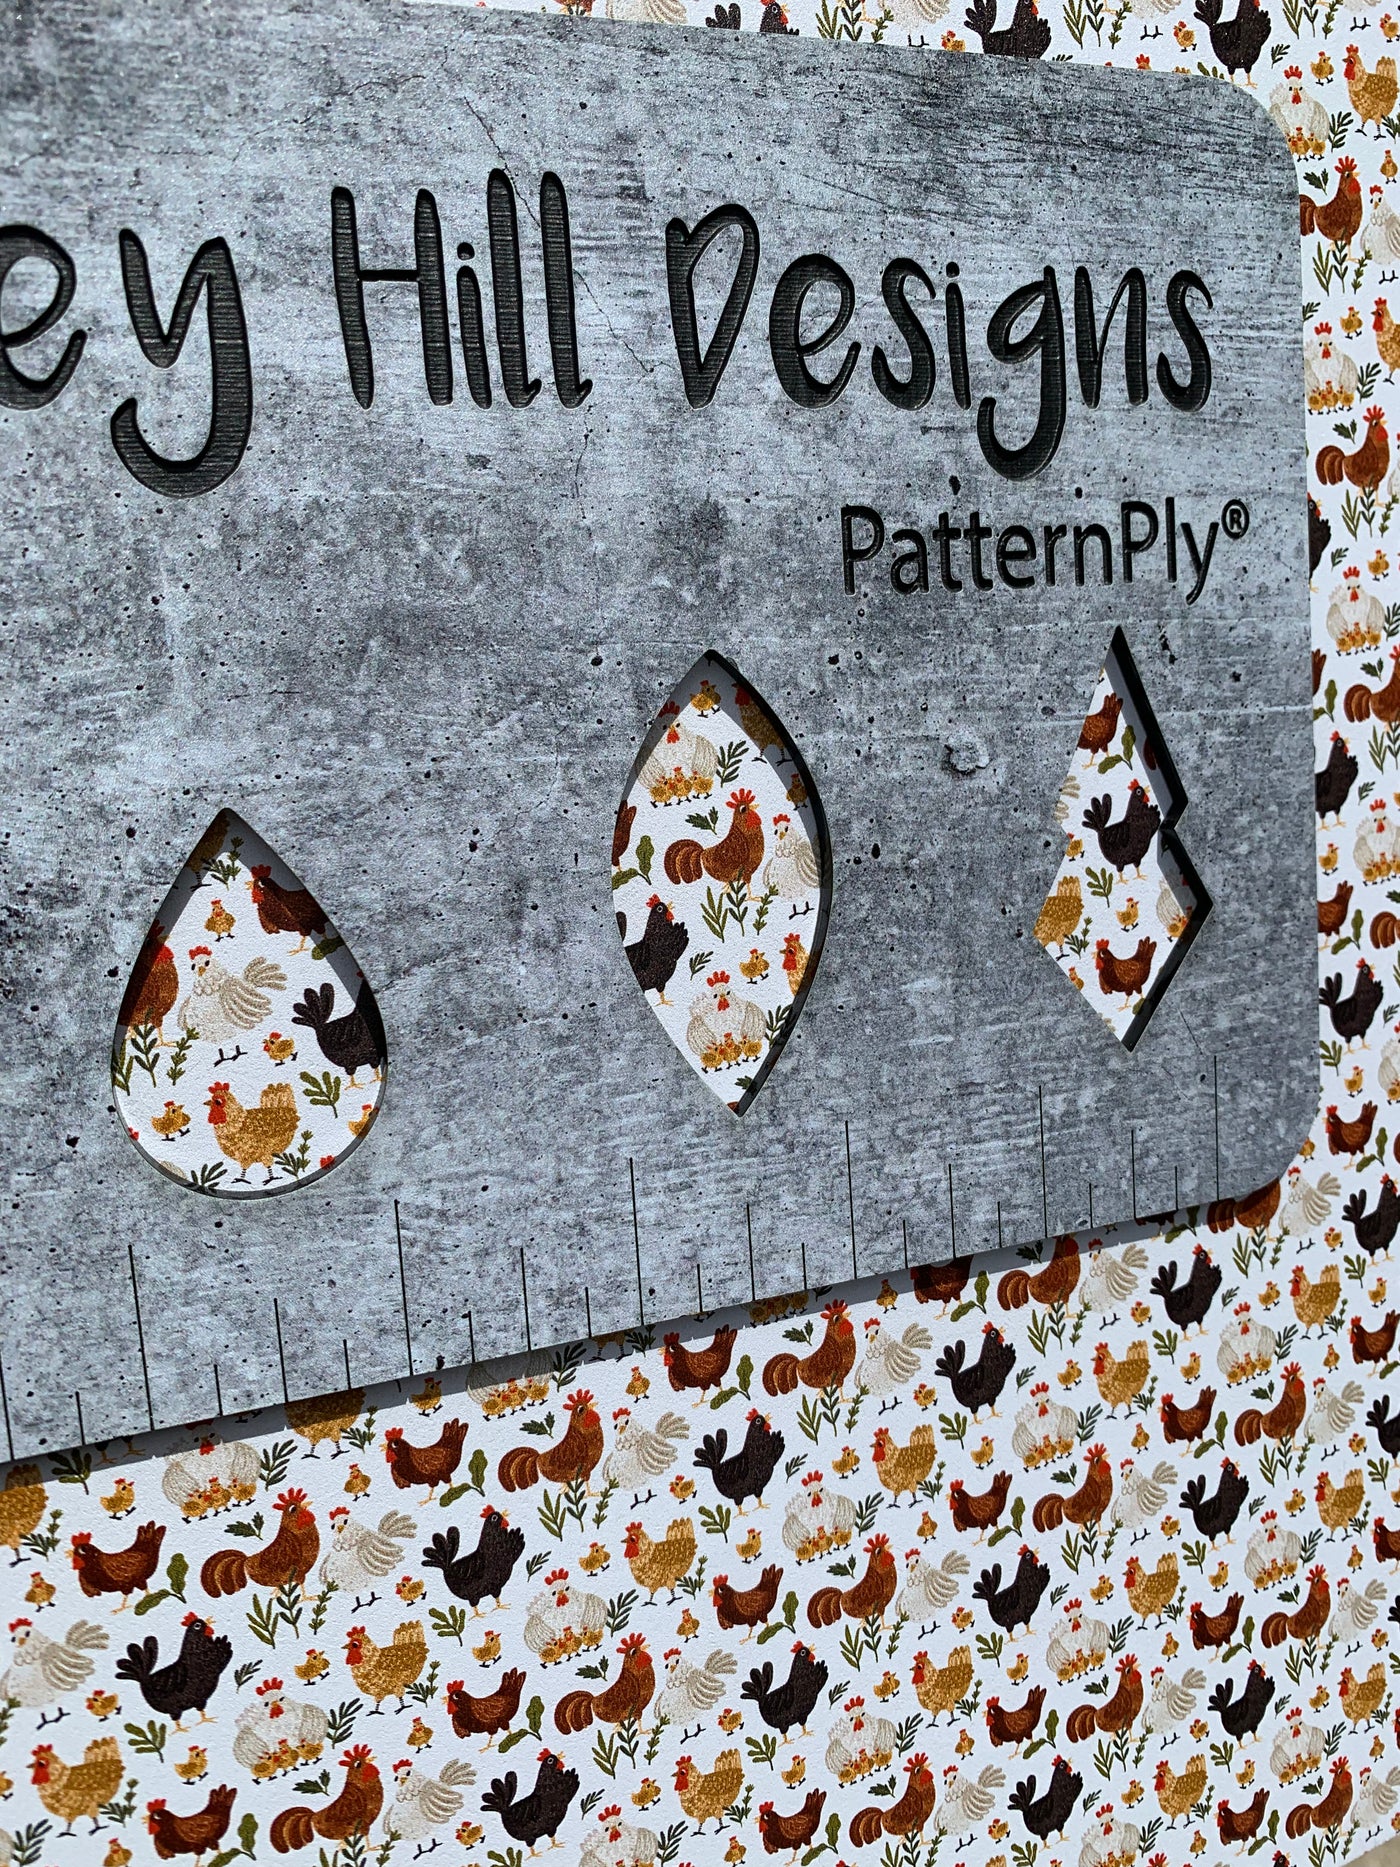 PatternPly® Chickens and Chicks